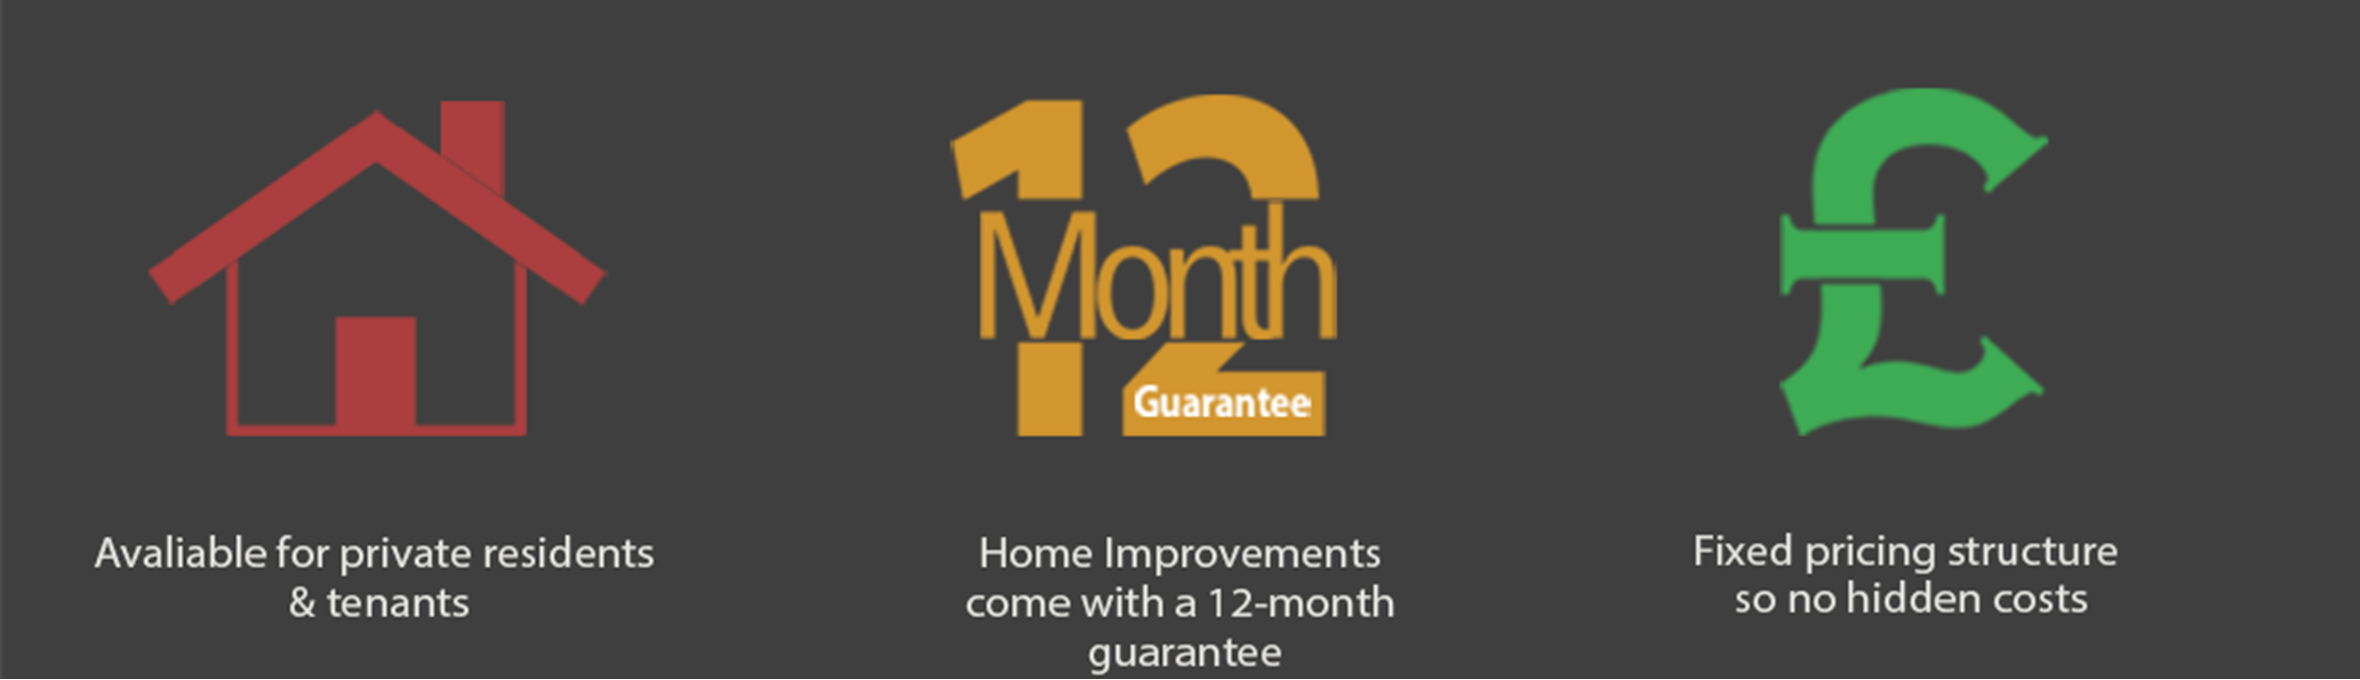 Services for private residents and tenants, 10 month guarantee, fixed price, commercial services